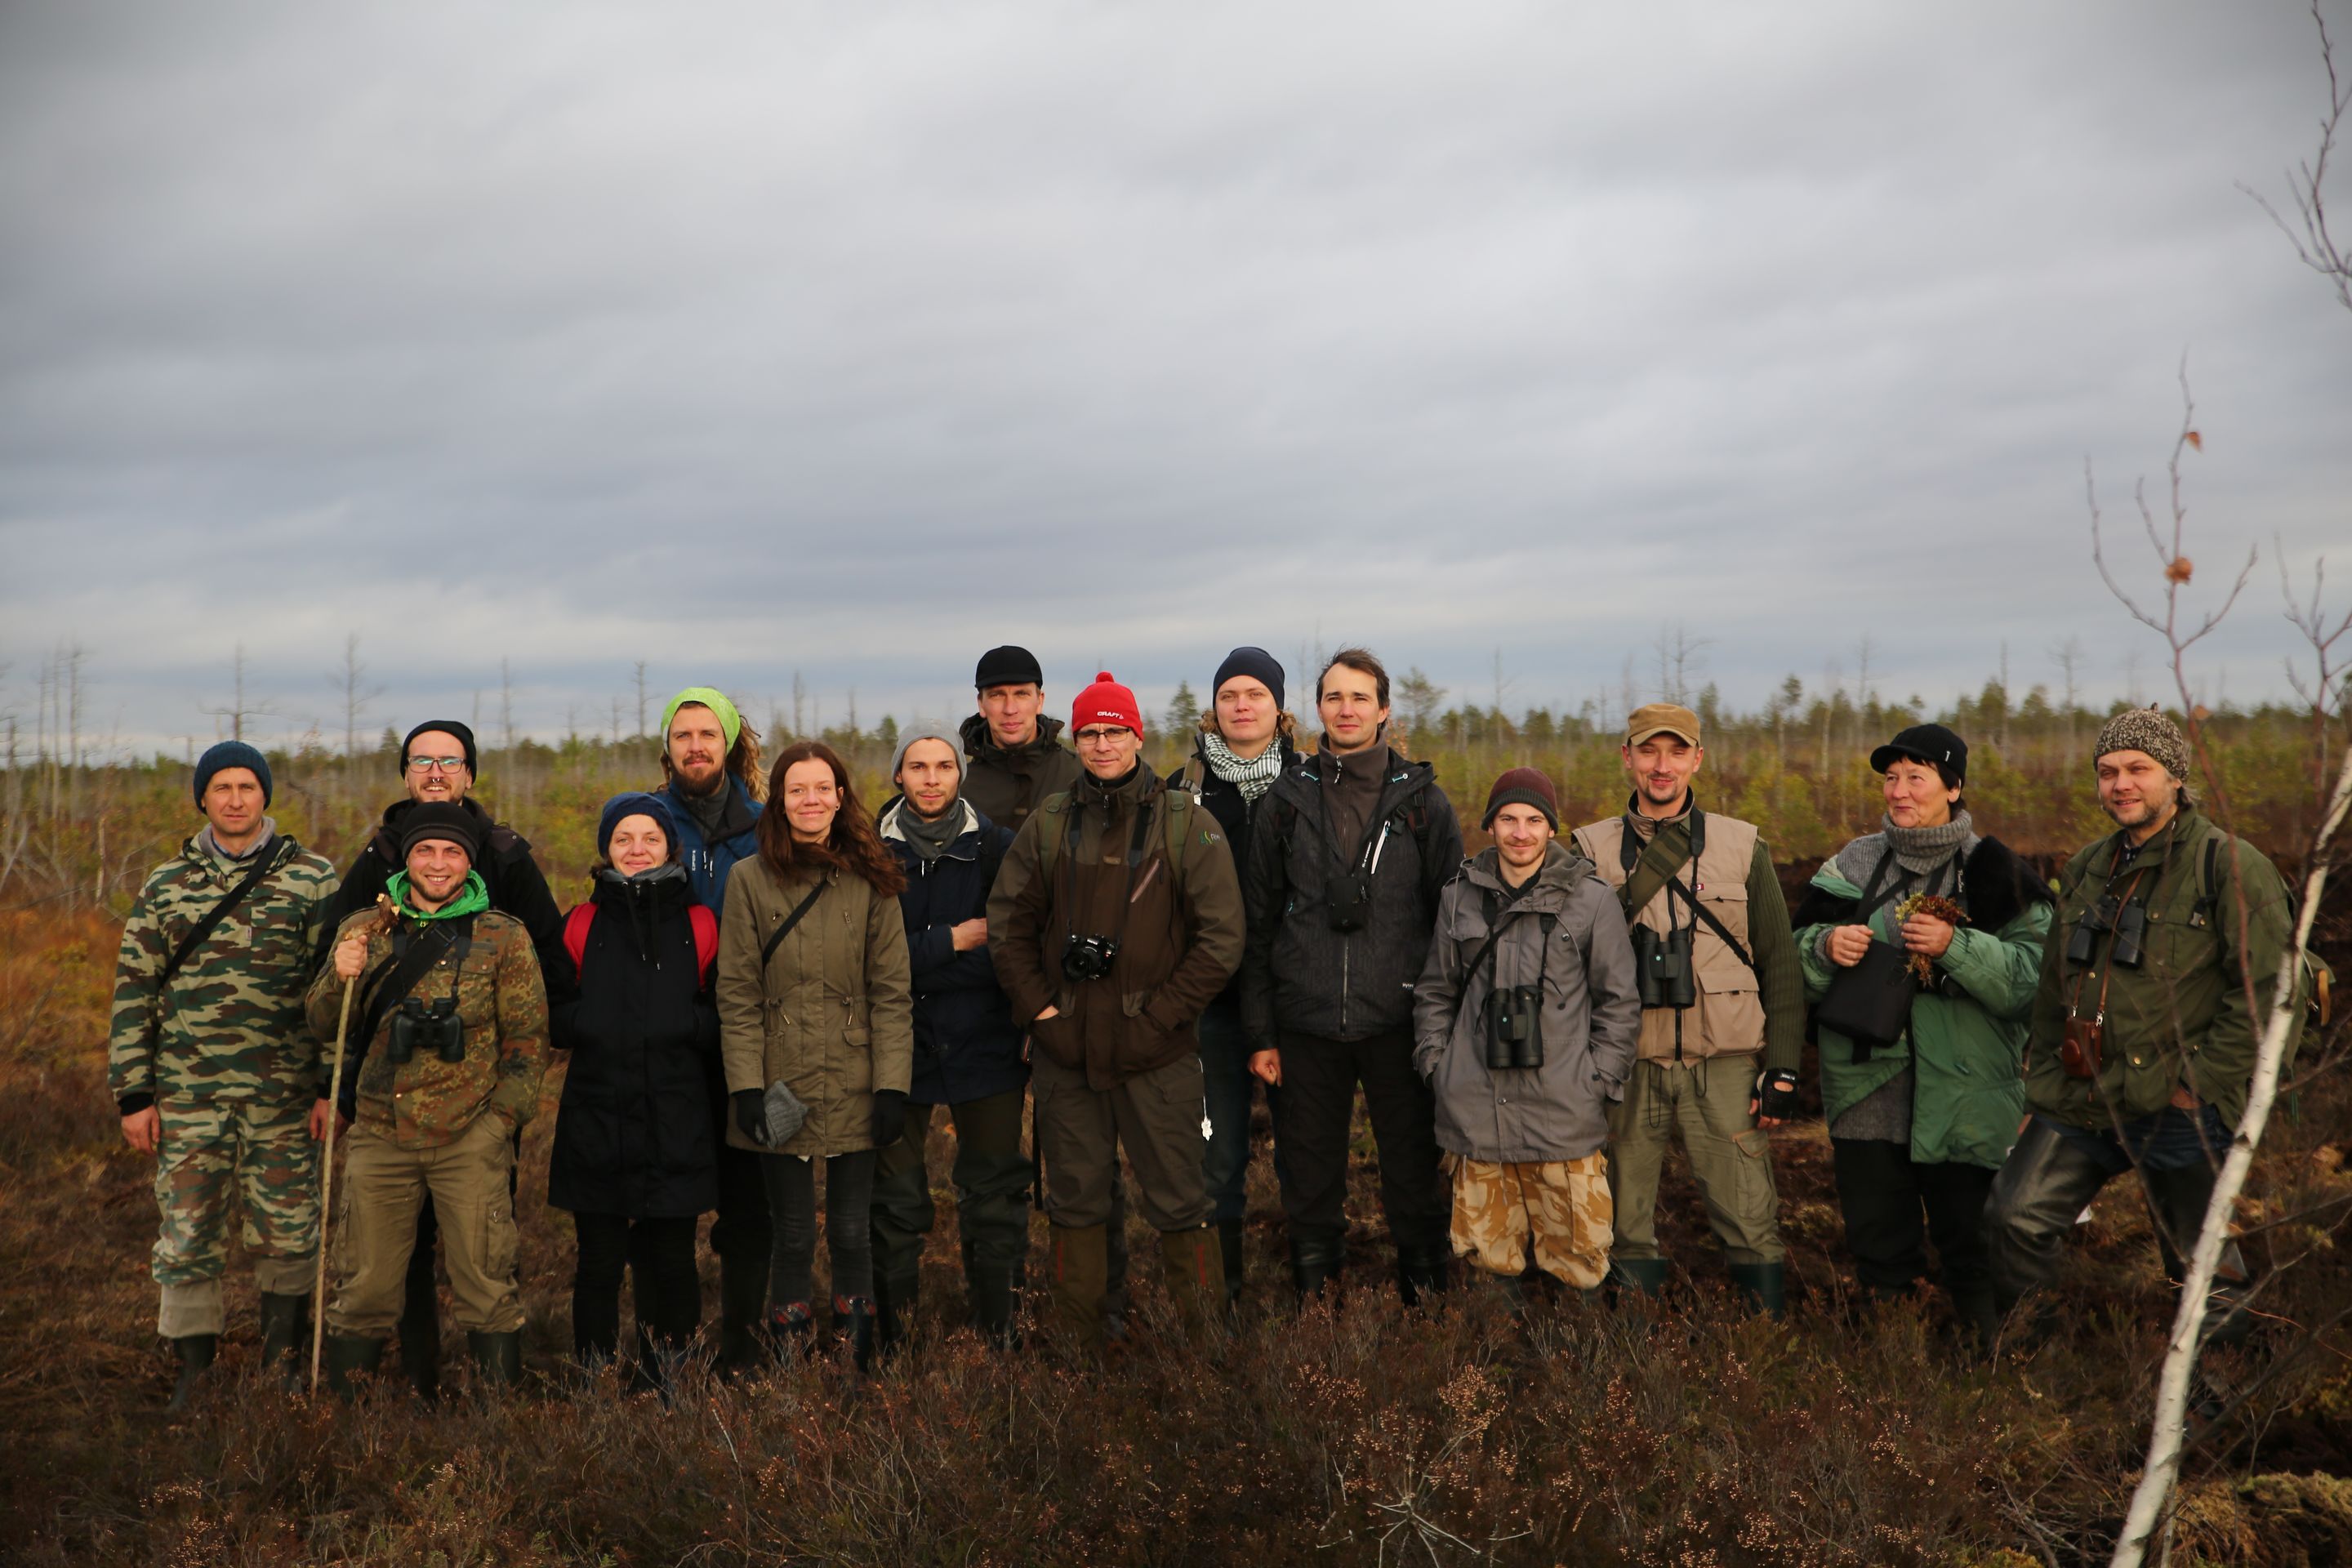 Contact seminar in the framework of the project “Partnership of Estonian and Belarusian public organizations in the field of wetland protection”. The project is supported by the Development and Humanitarian Aid Program of the Estonian Ministry of Foreign Affairs.